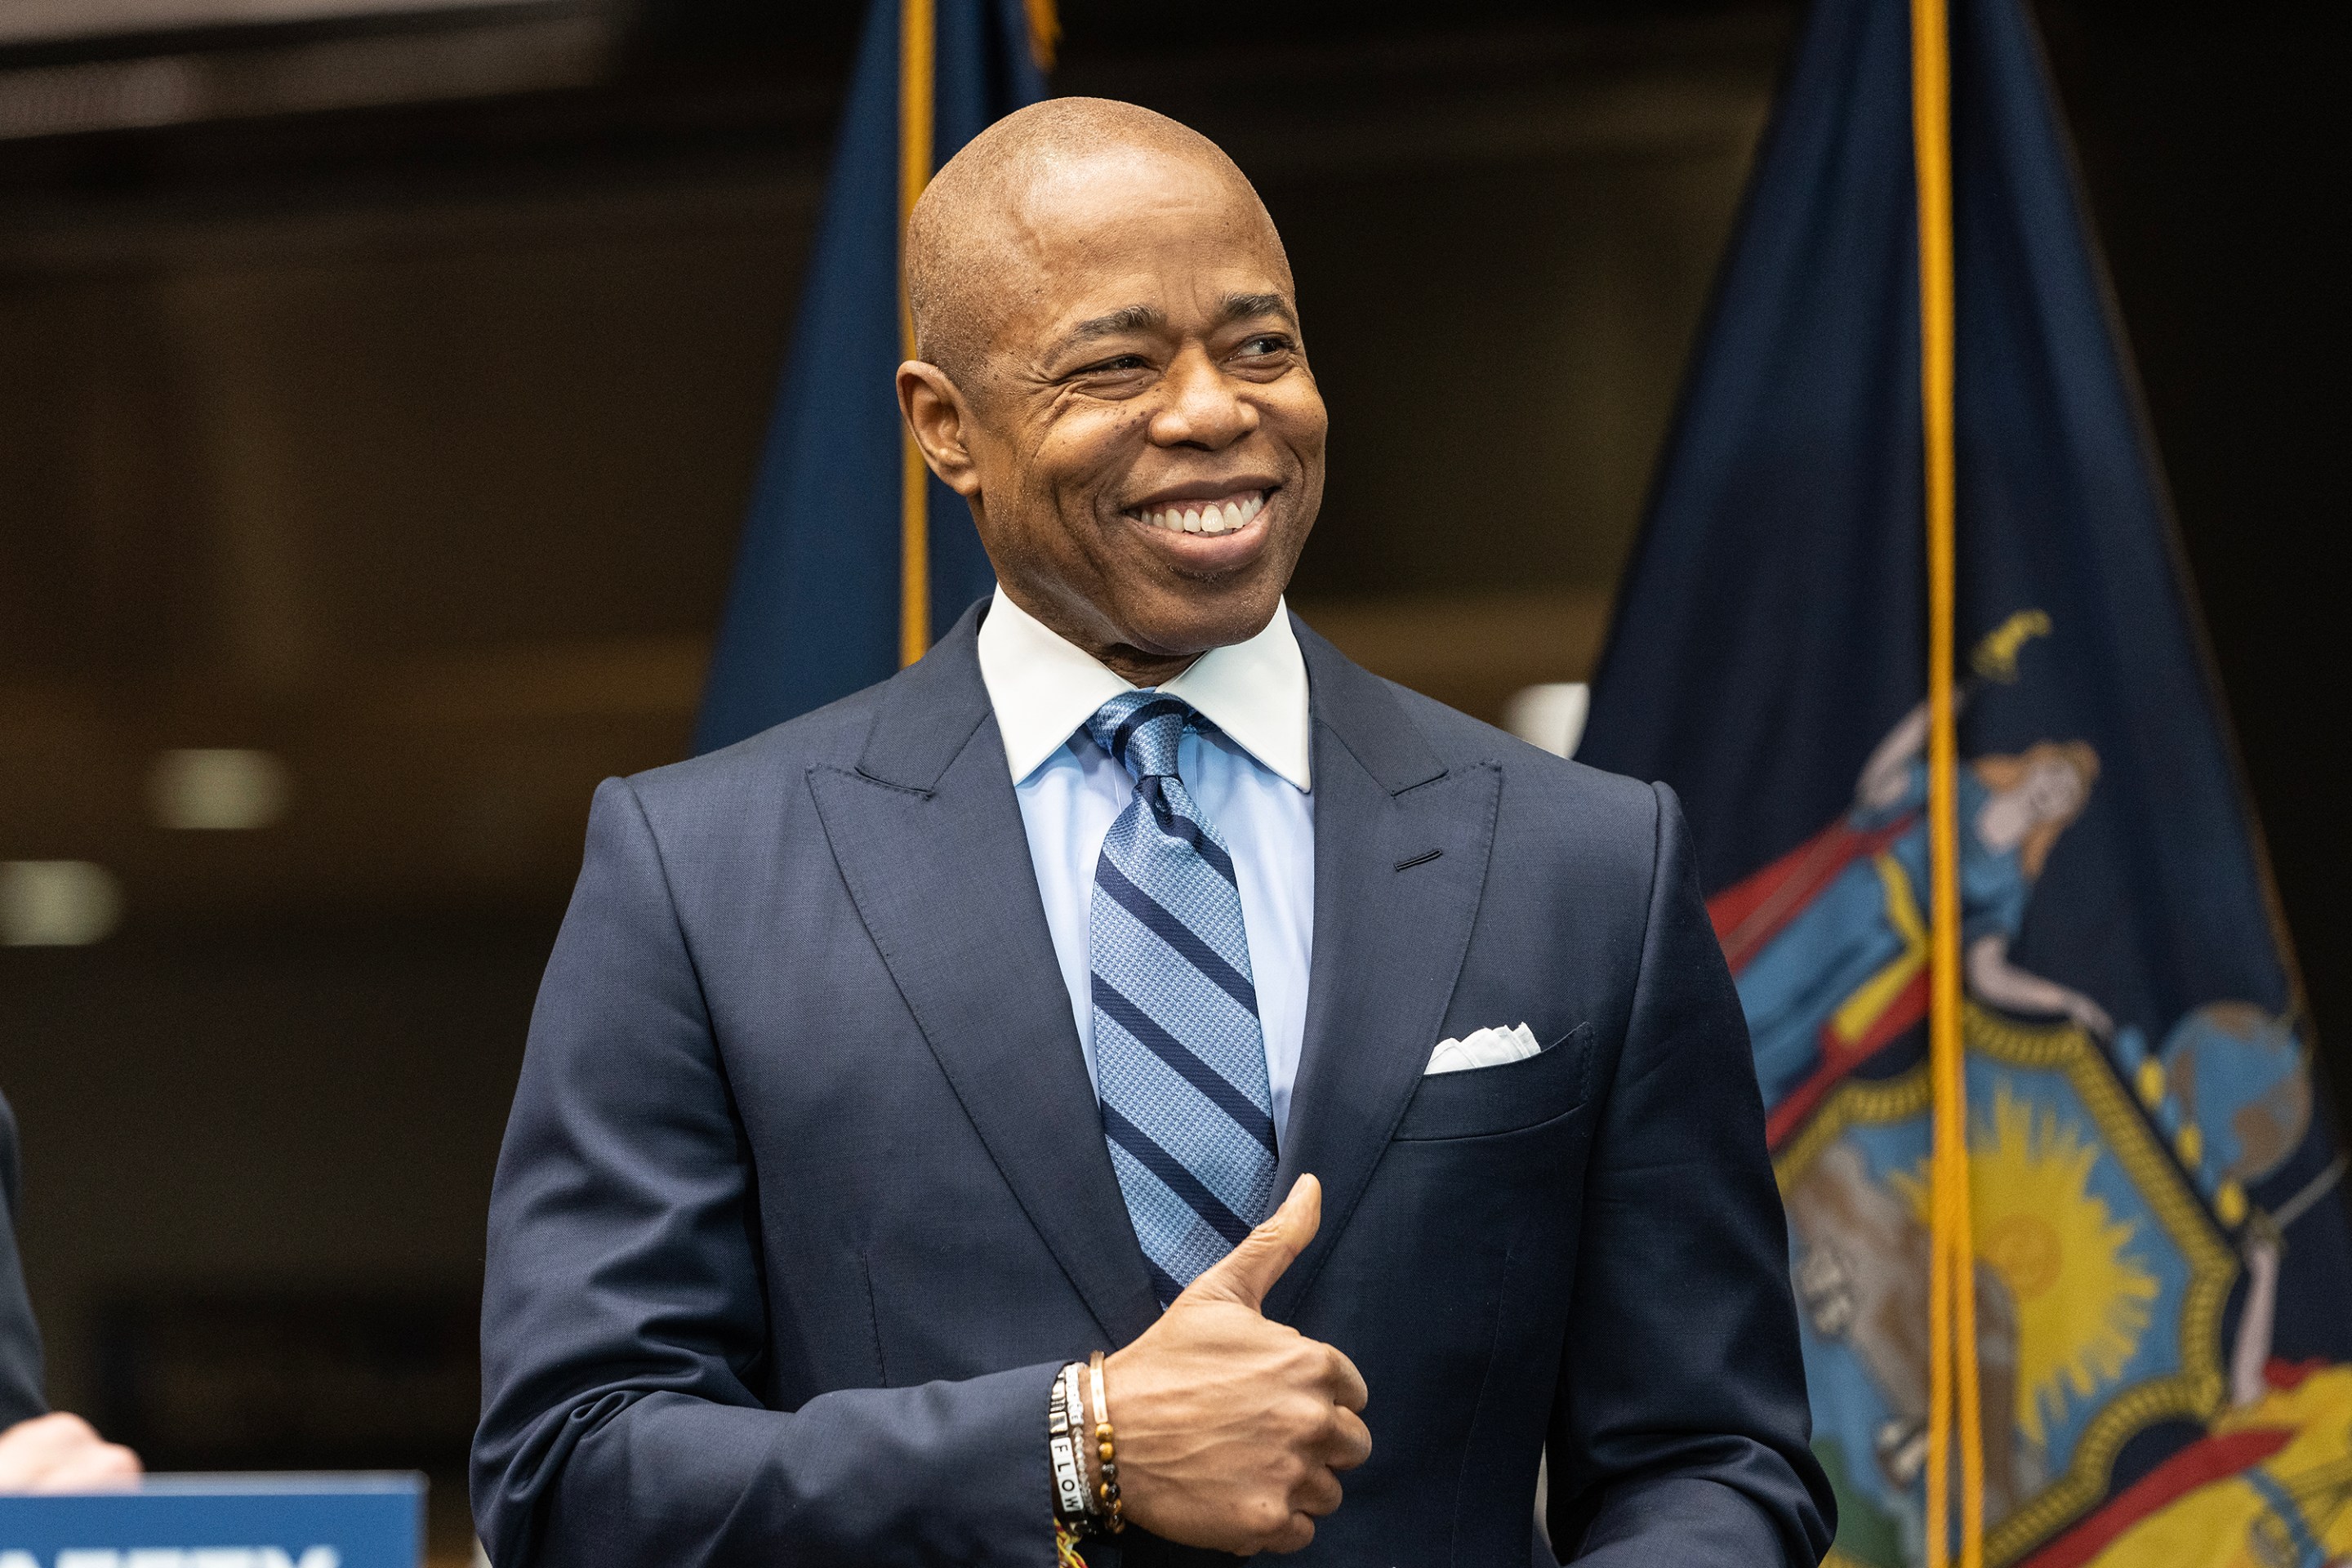 New York City Mayor Eric Adams smiles and gives a thumbs-up at an MTA event in January of 2023.